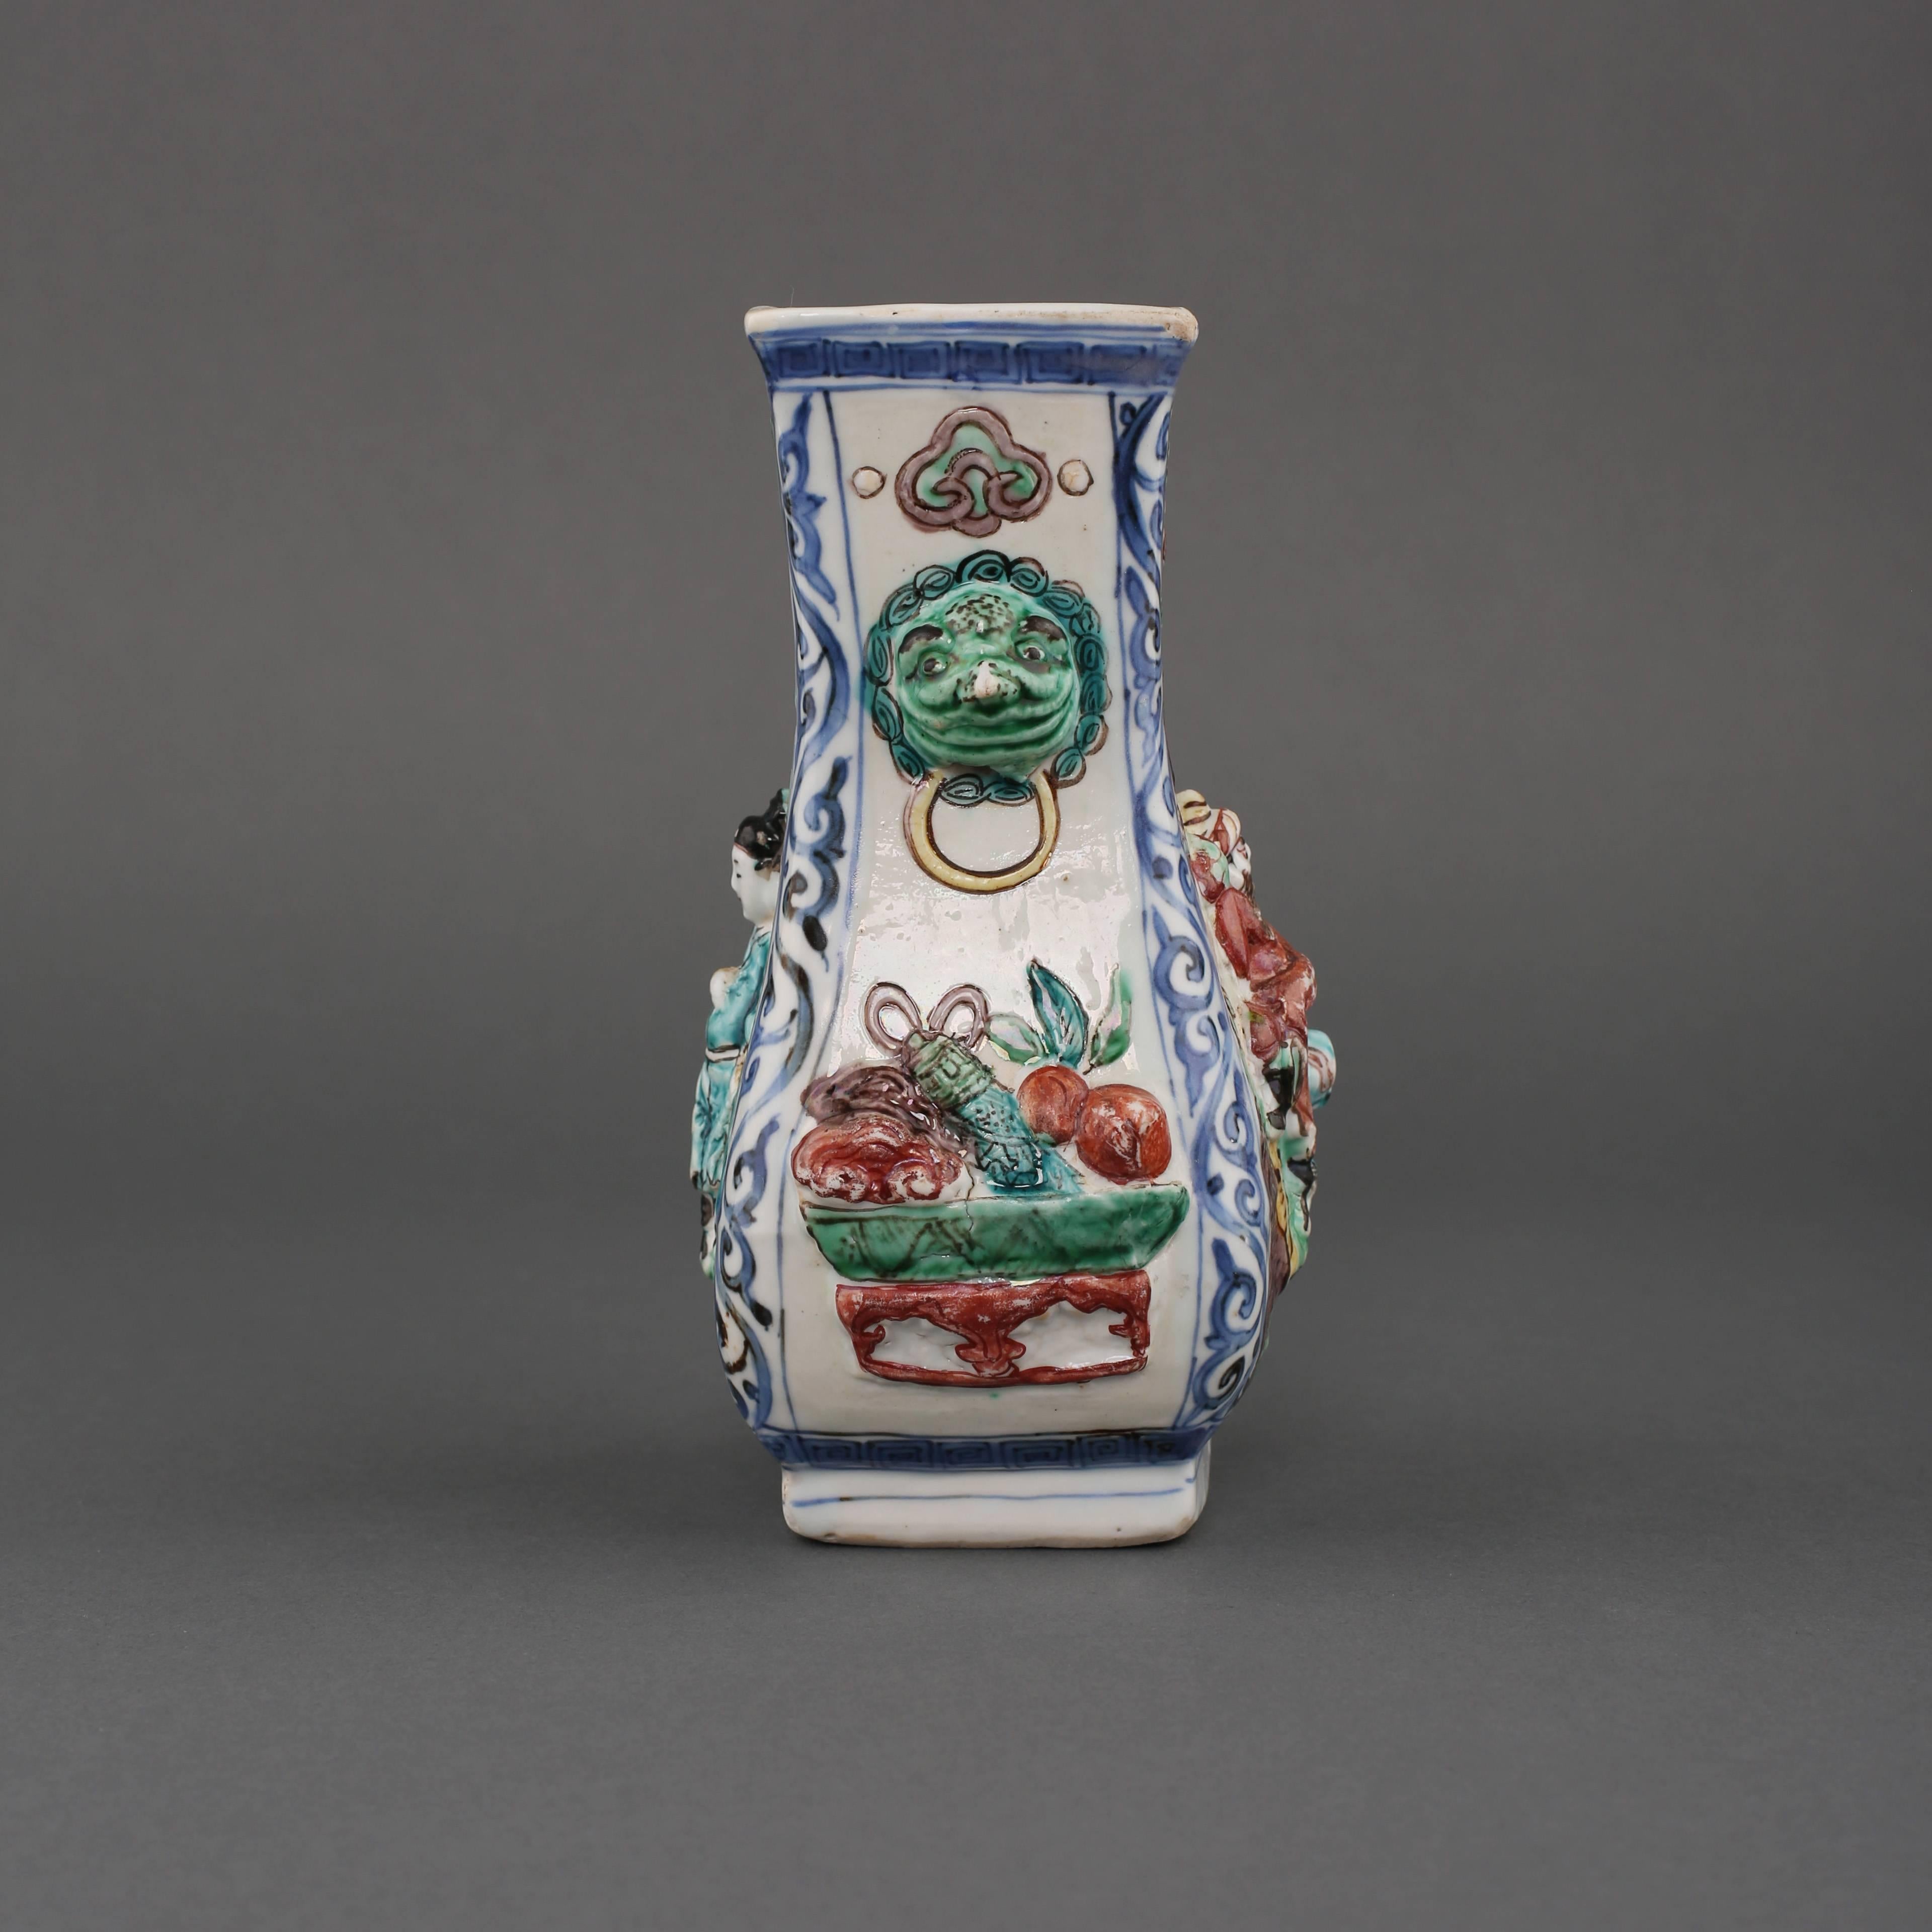 Painted Chinese Porcelain Wucai Pear Shaped Rectangular Vase, 17th Century For Sale